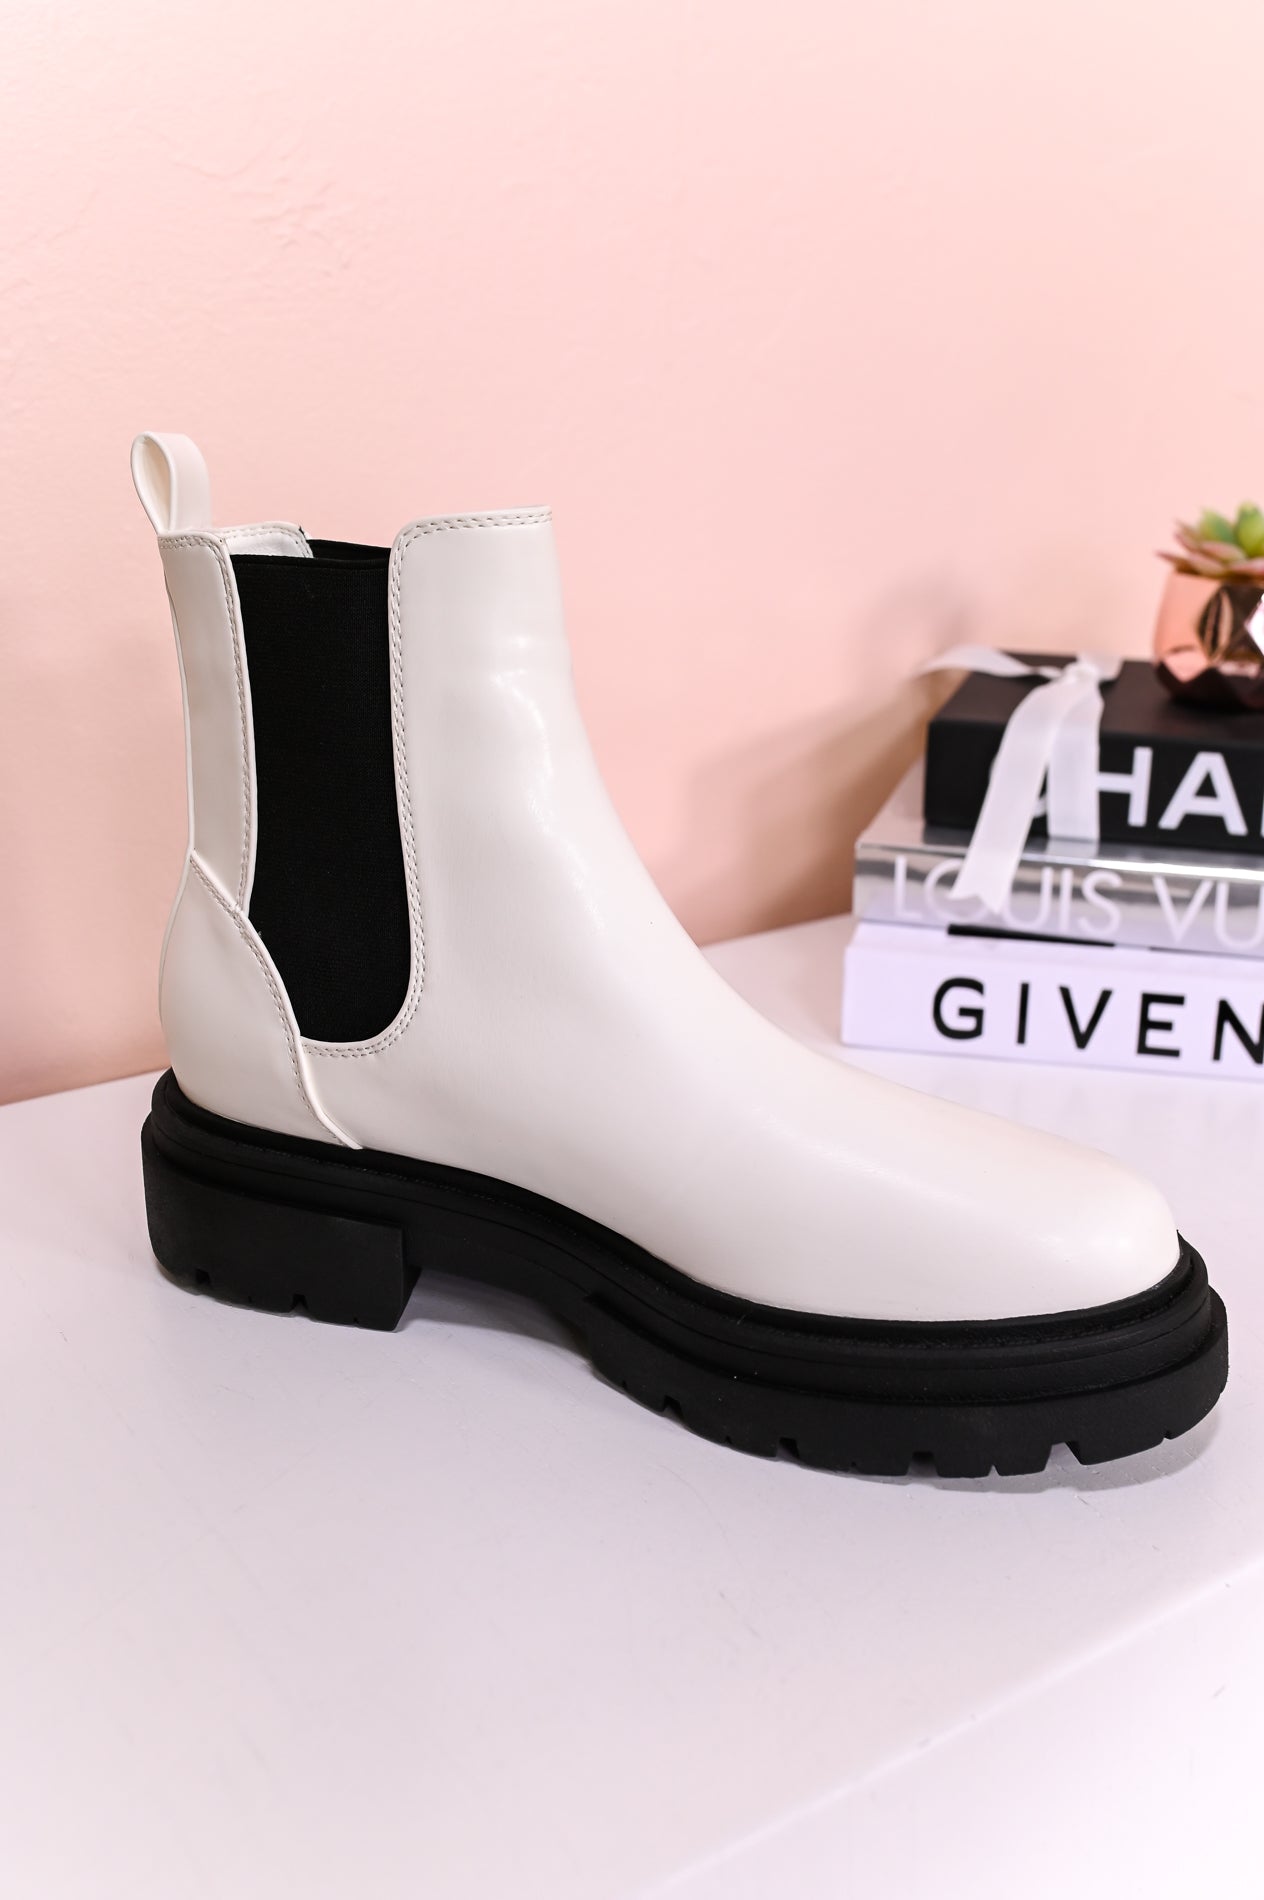 Get On My Level White/Black Slip On Combat Boots - SHO2425WH